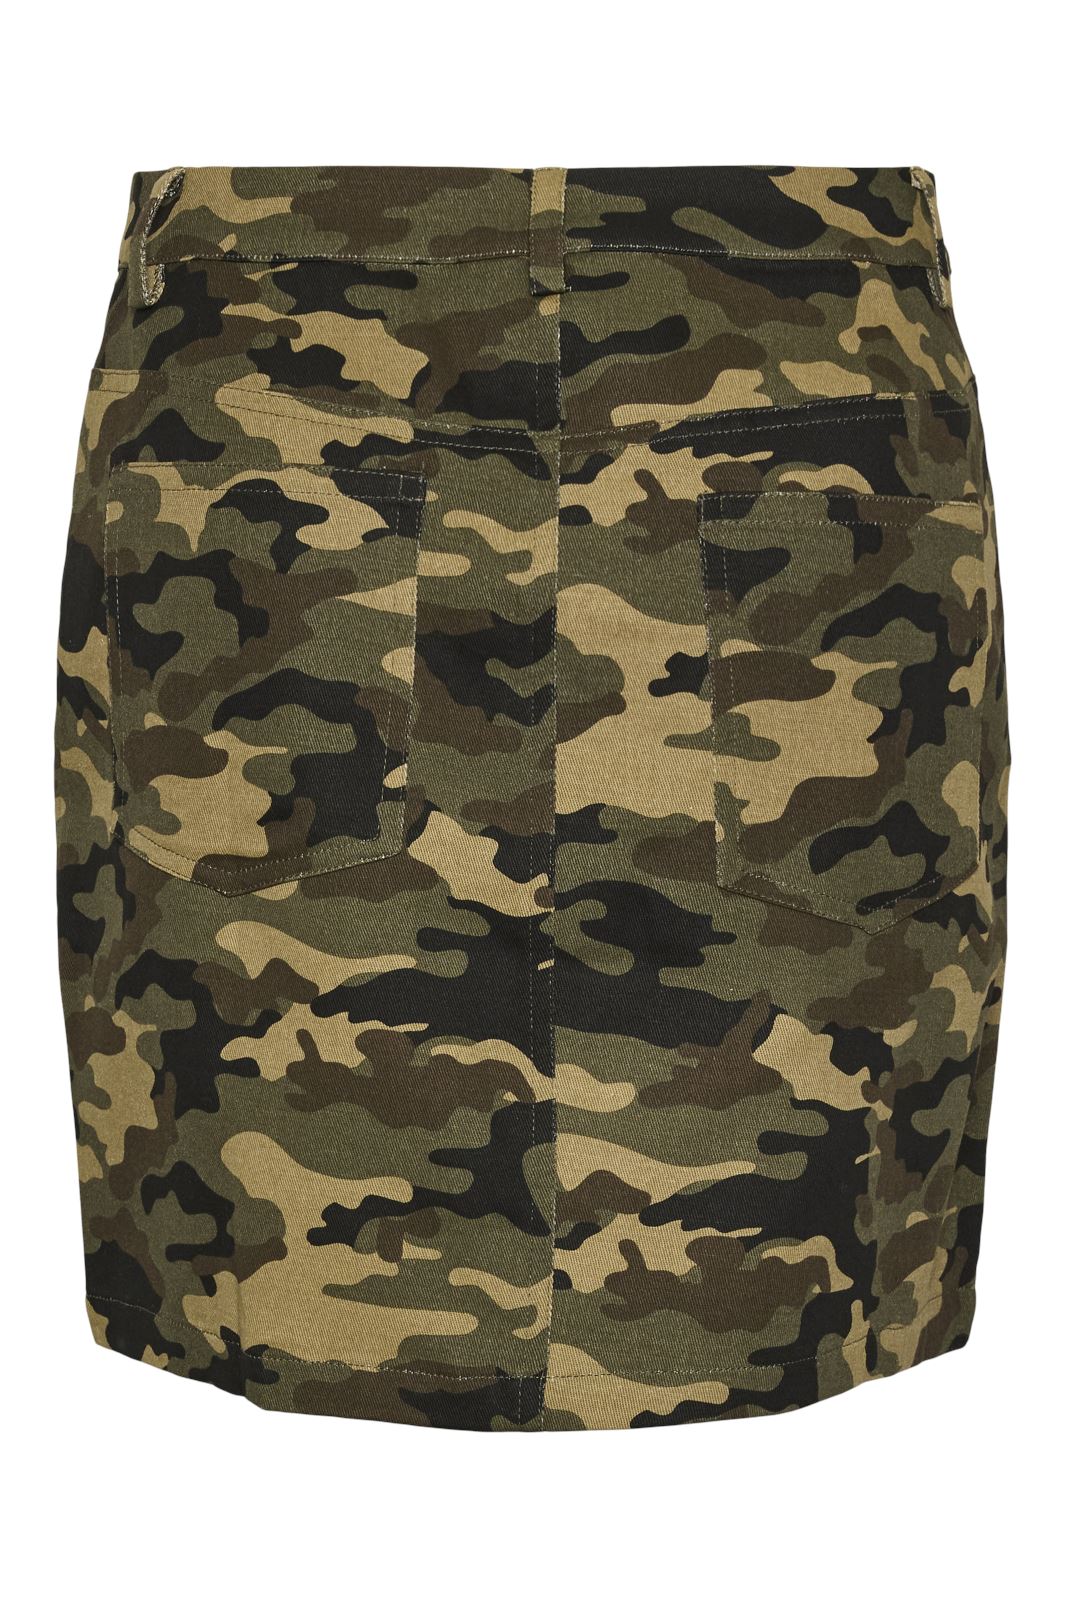 Pieces - Pcjessica Short Skirt Jit - 4640875 Burnt Olive Camouflage Print